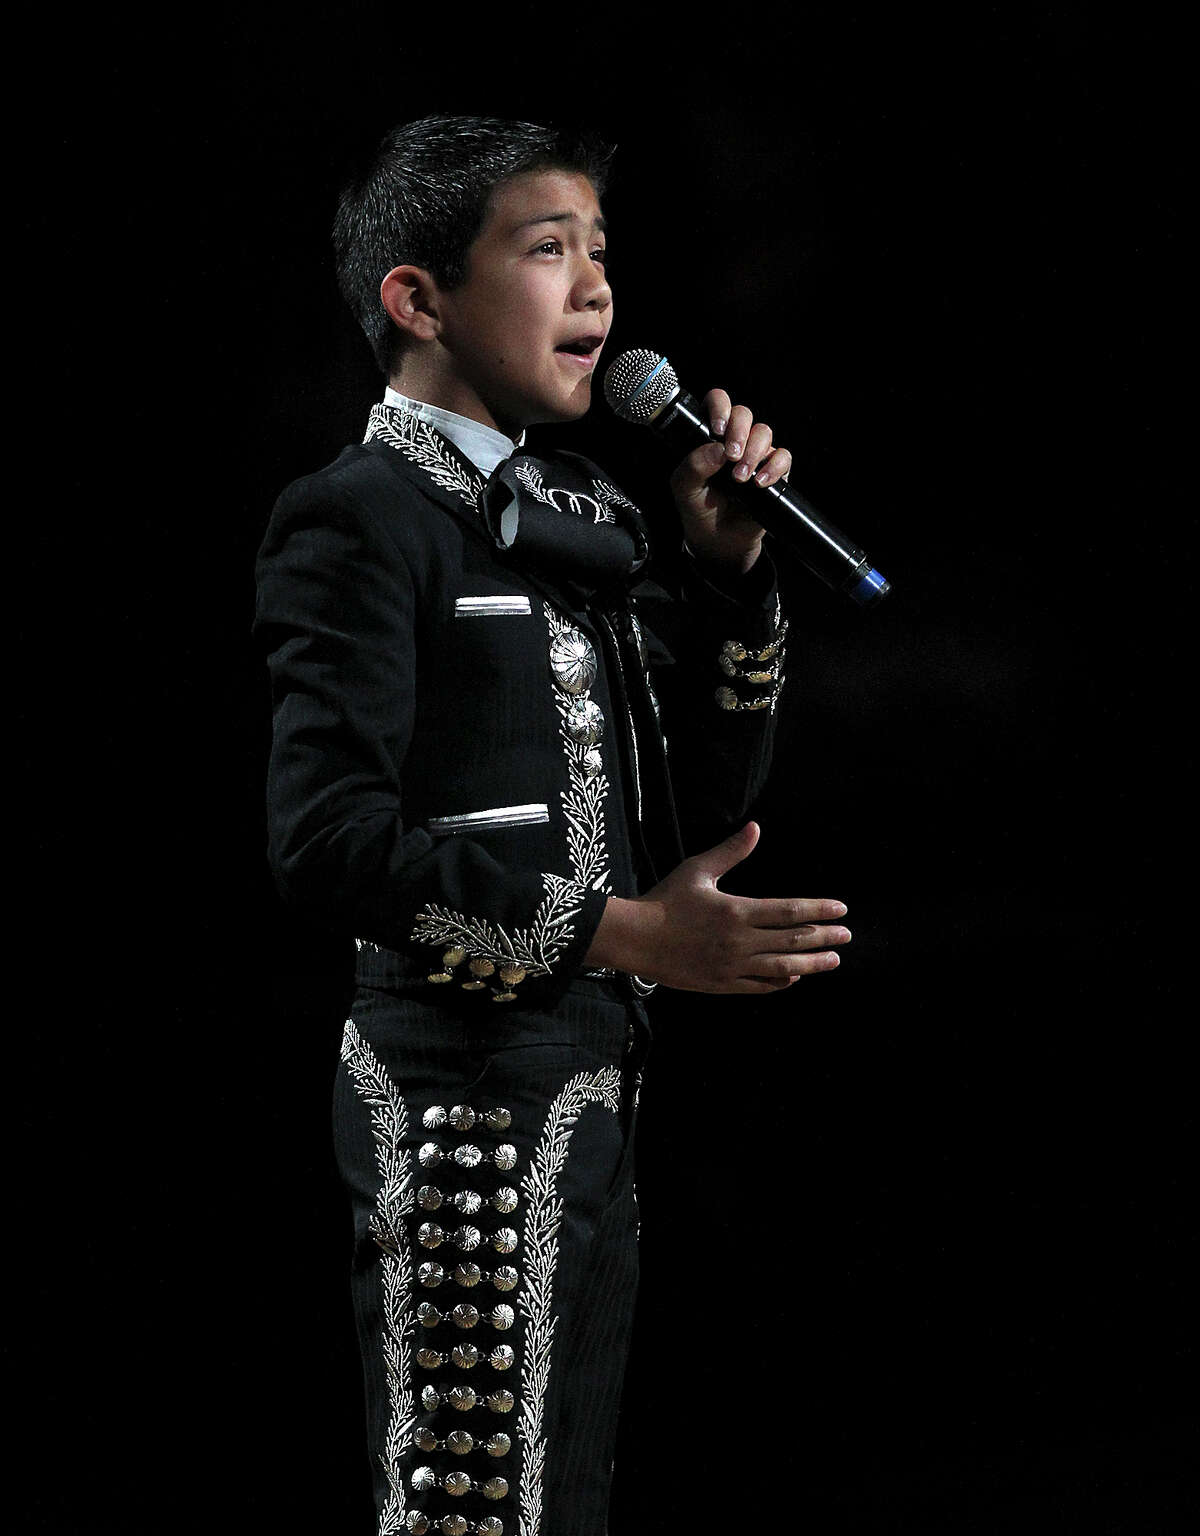 Mariachi singer Sebastian De La Cruz is used to being in the spotlight. Here he is singing the National Athem before the start of game one in the first round of the Western Conference Playoffs between the San Antonio Spurs and Dallas Mavericks at the AT&T Center, Sunday, April 20, 2014.